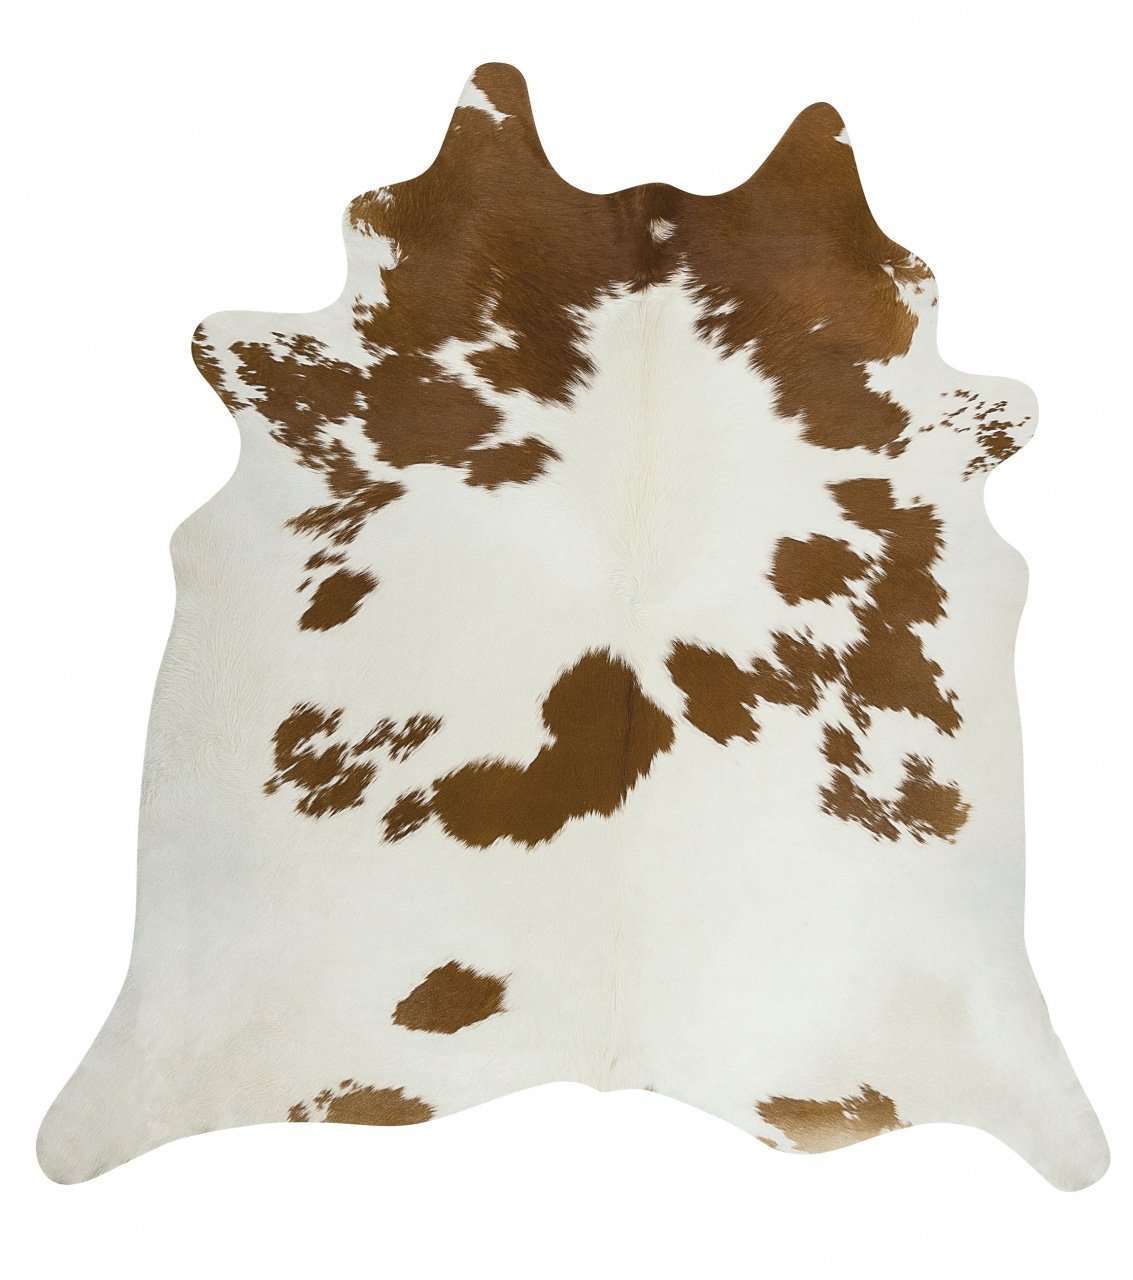 Rug Culture RUGS 170x120cm Cow Hide - Brown & White